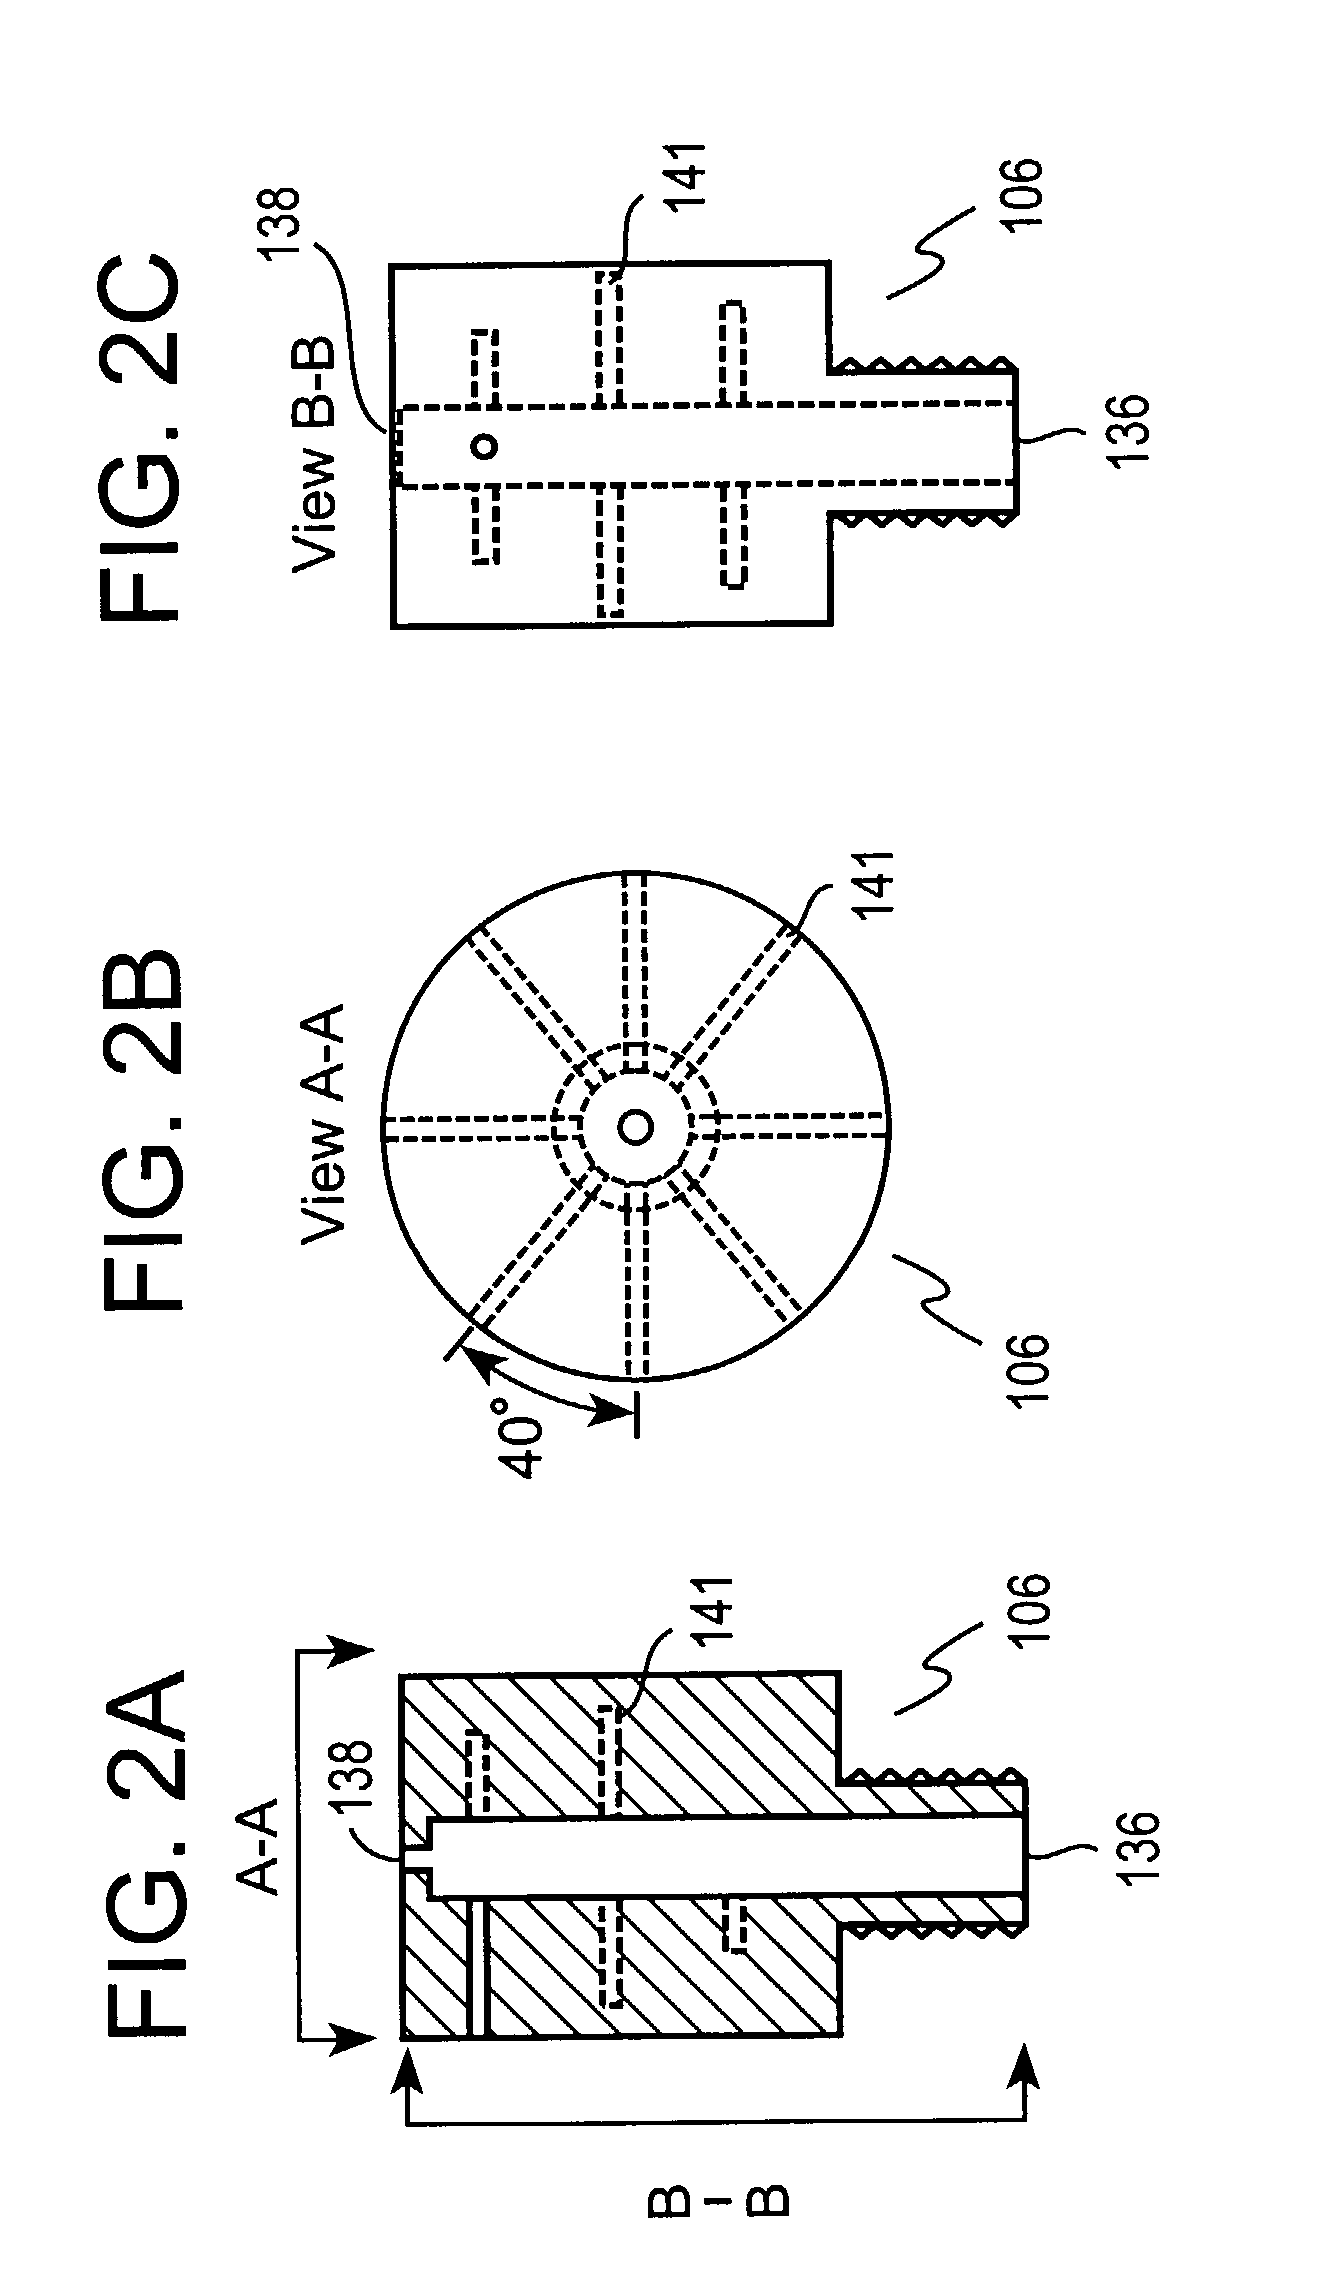 Apparatus and method for vaporizing a liquid chemical